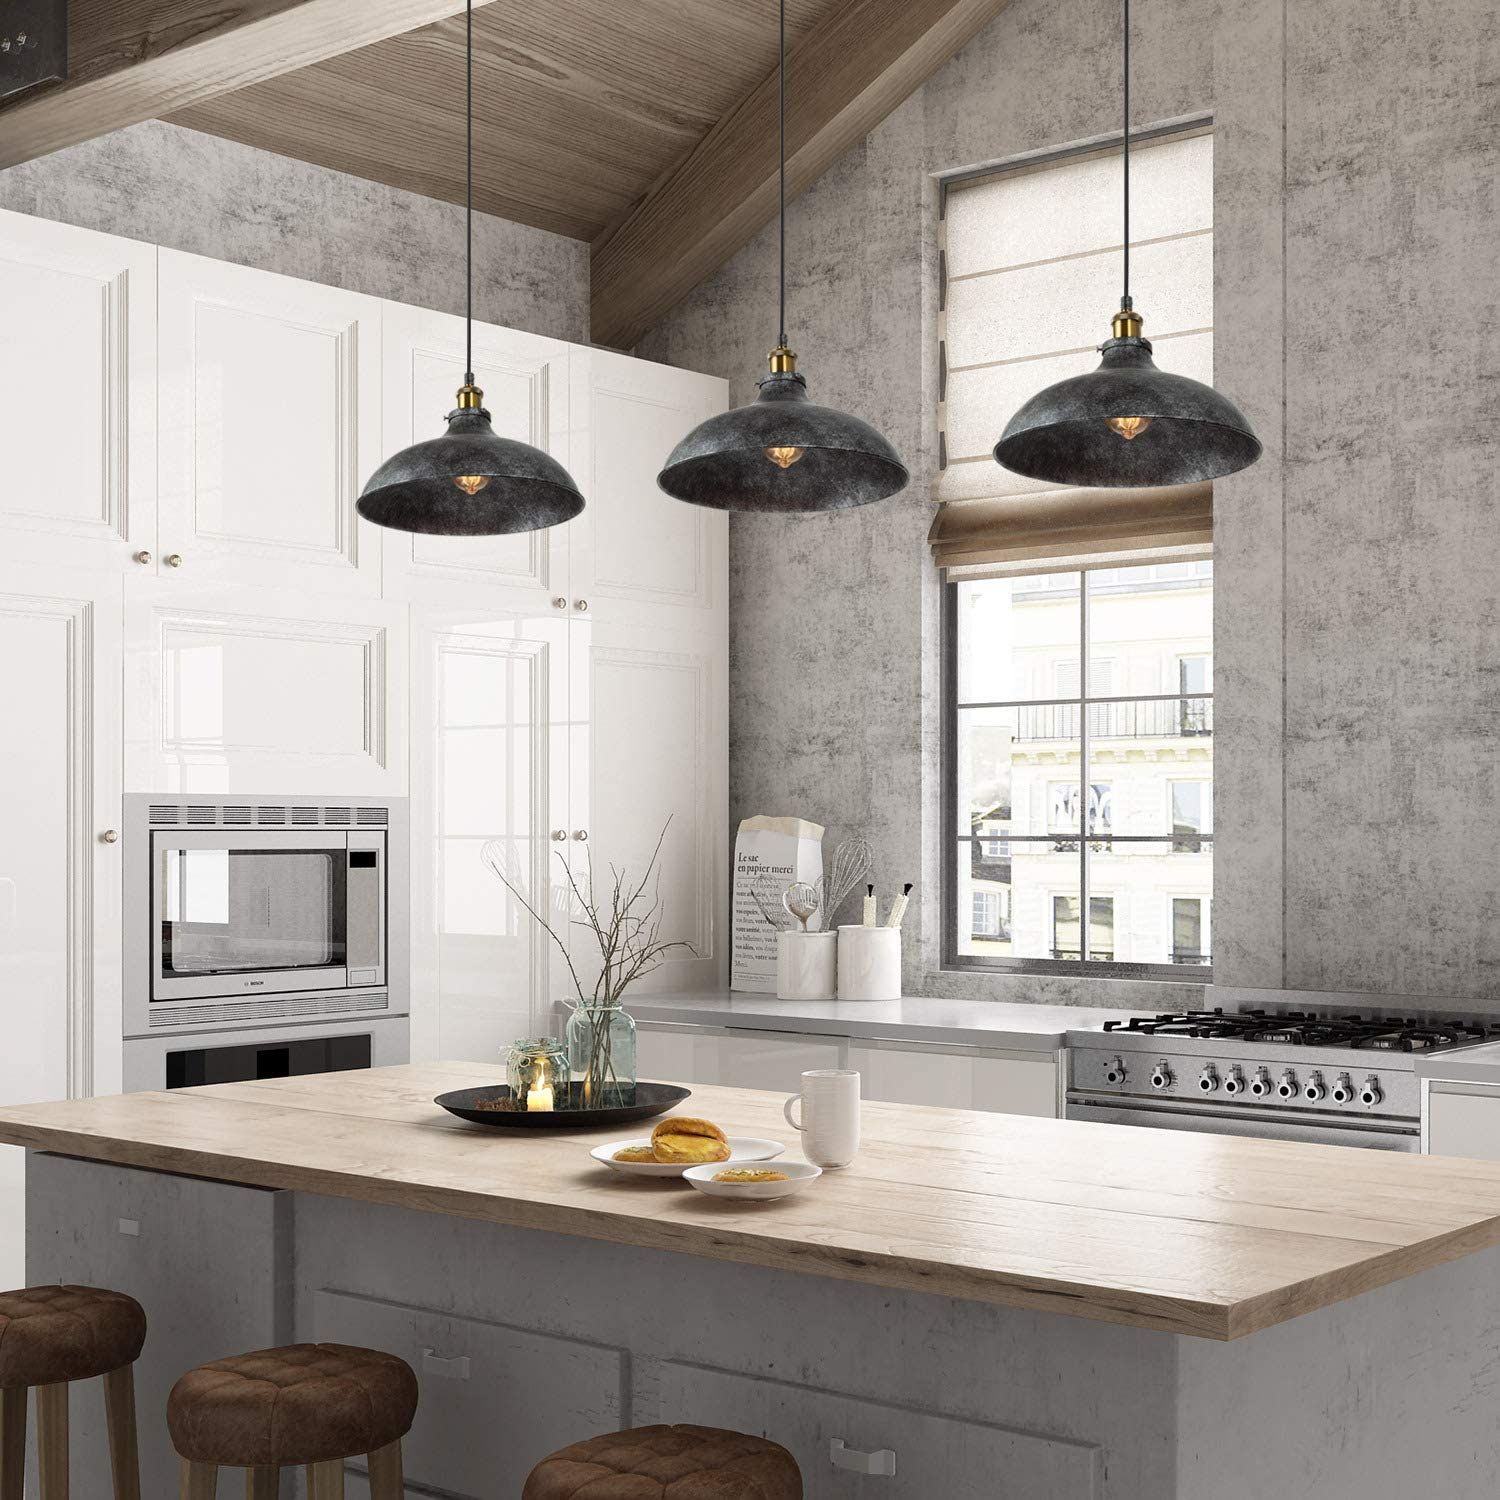 Lnc Pendant Lighting For Kitchen Island Industrial Big Regarding Kitchen Island Light Chandeliers (View 1 of 15)